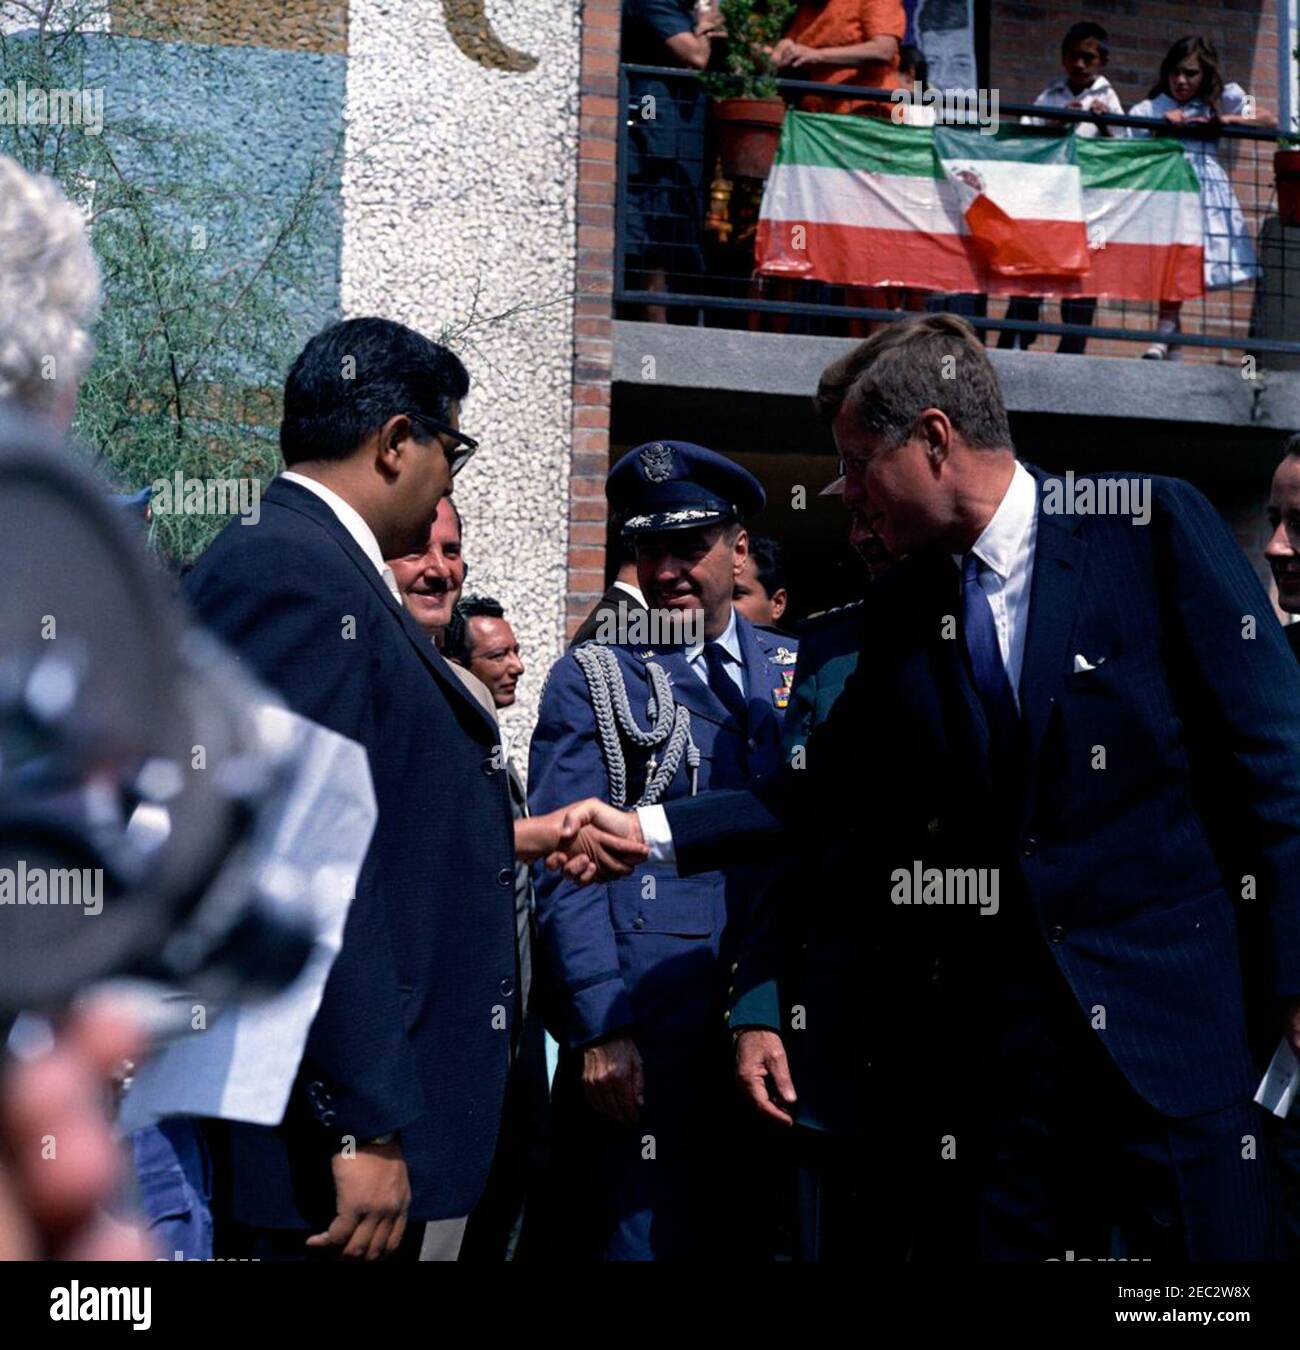 Trip to Mexico: Tour and address at the Independencia Housing Project, 9:35AM. President John F. Kennedy visits with crowds during a tour of the Unidad Independencia (Independencia Housing Project) in Mexico City, Mexico. Standing with President Kennedy: Air Force Aide to President Kennedy, Brigadier General Godfrey T. McHugh; General Cristu00f3bal Guzmu00e1n Cu00e1rdenas; U.S. State Department interpreter, Donald Barnes. Stock Photo